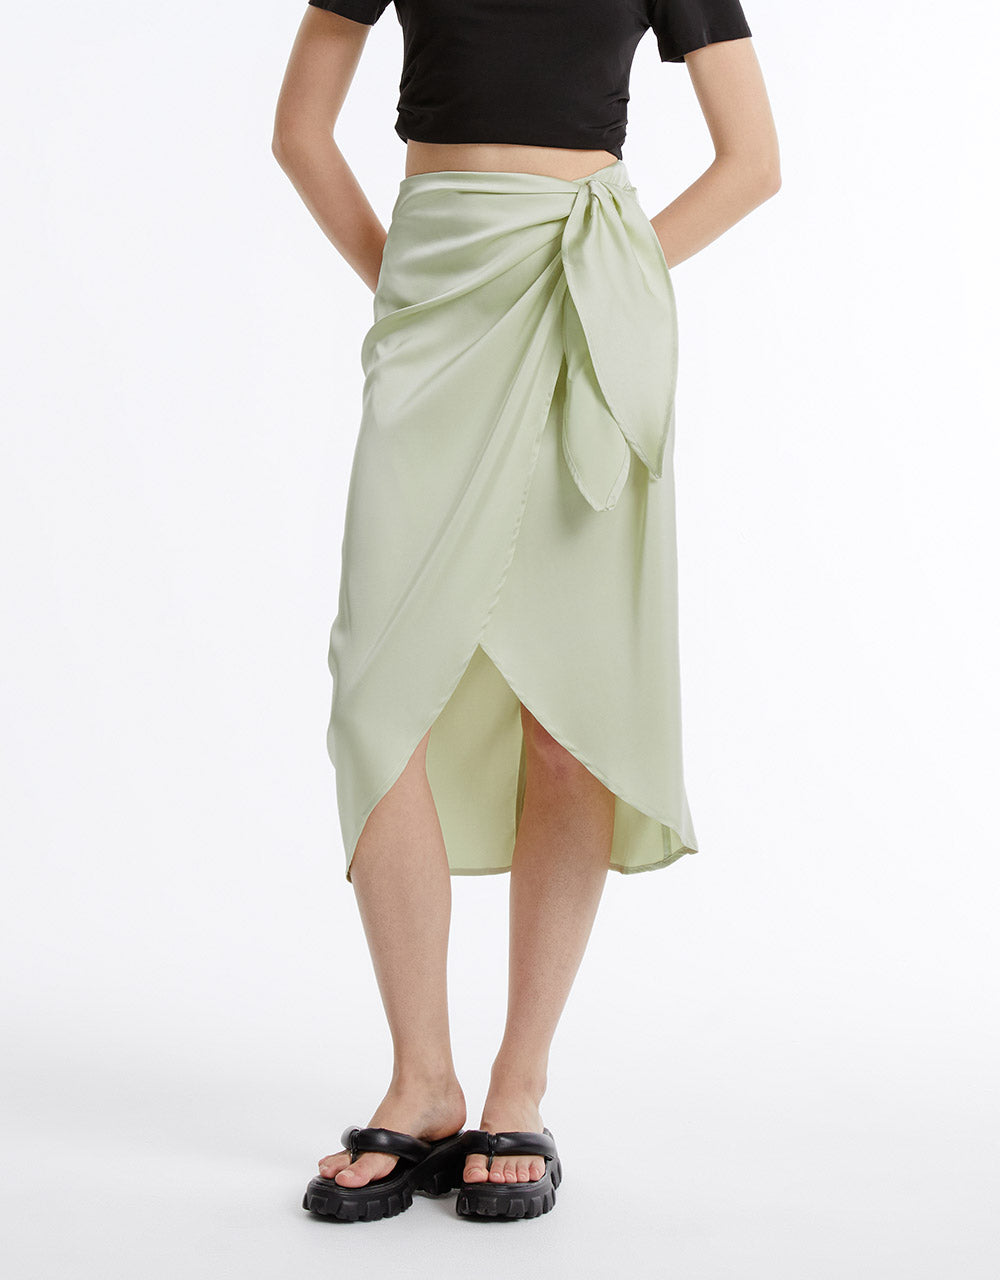 Satin Effect Wrapped Skirt